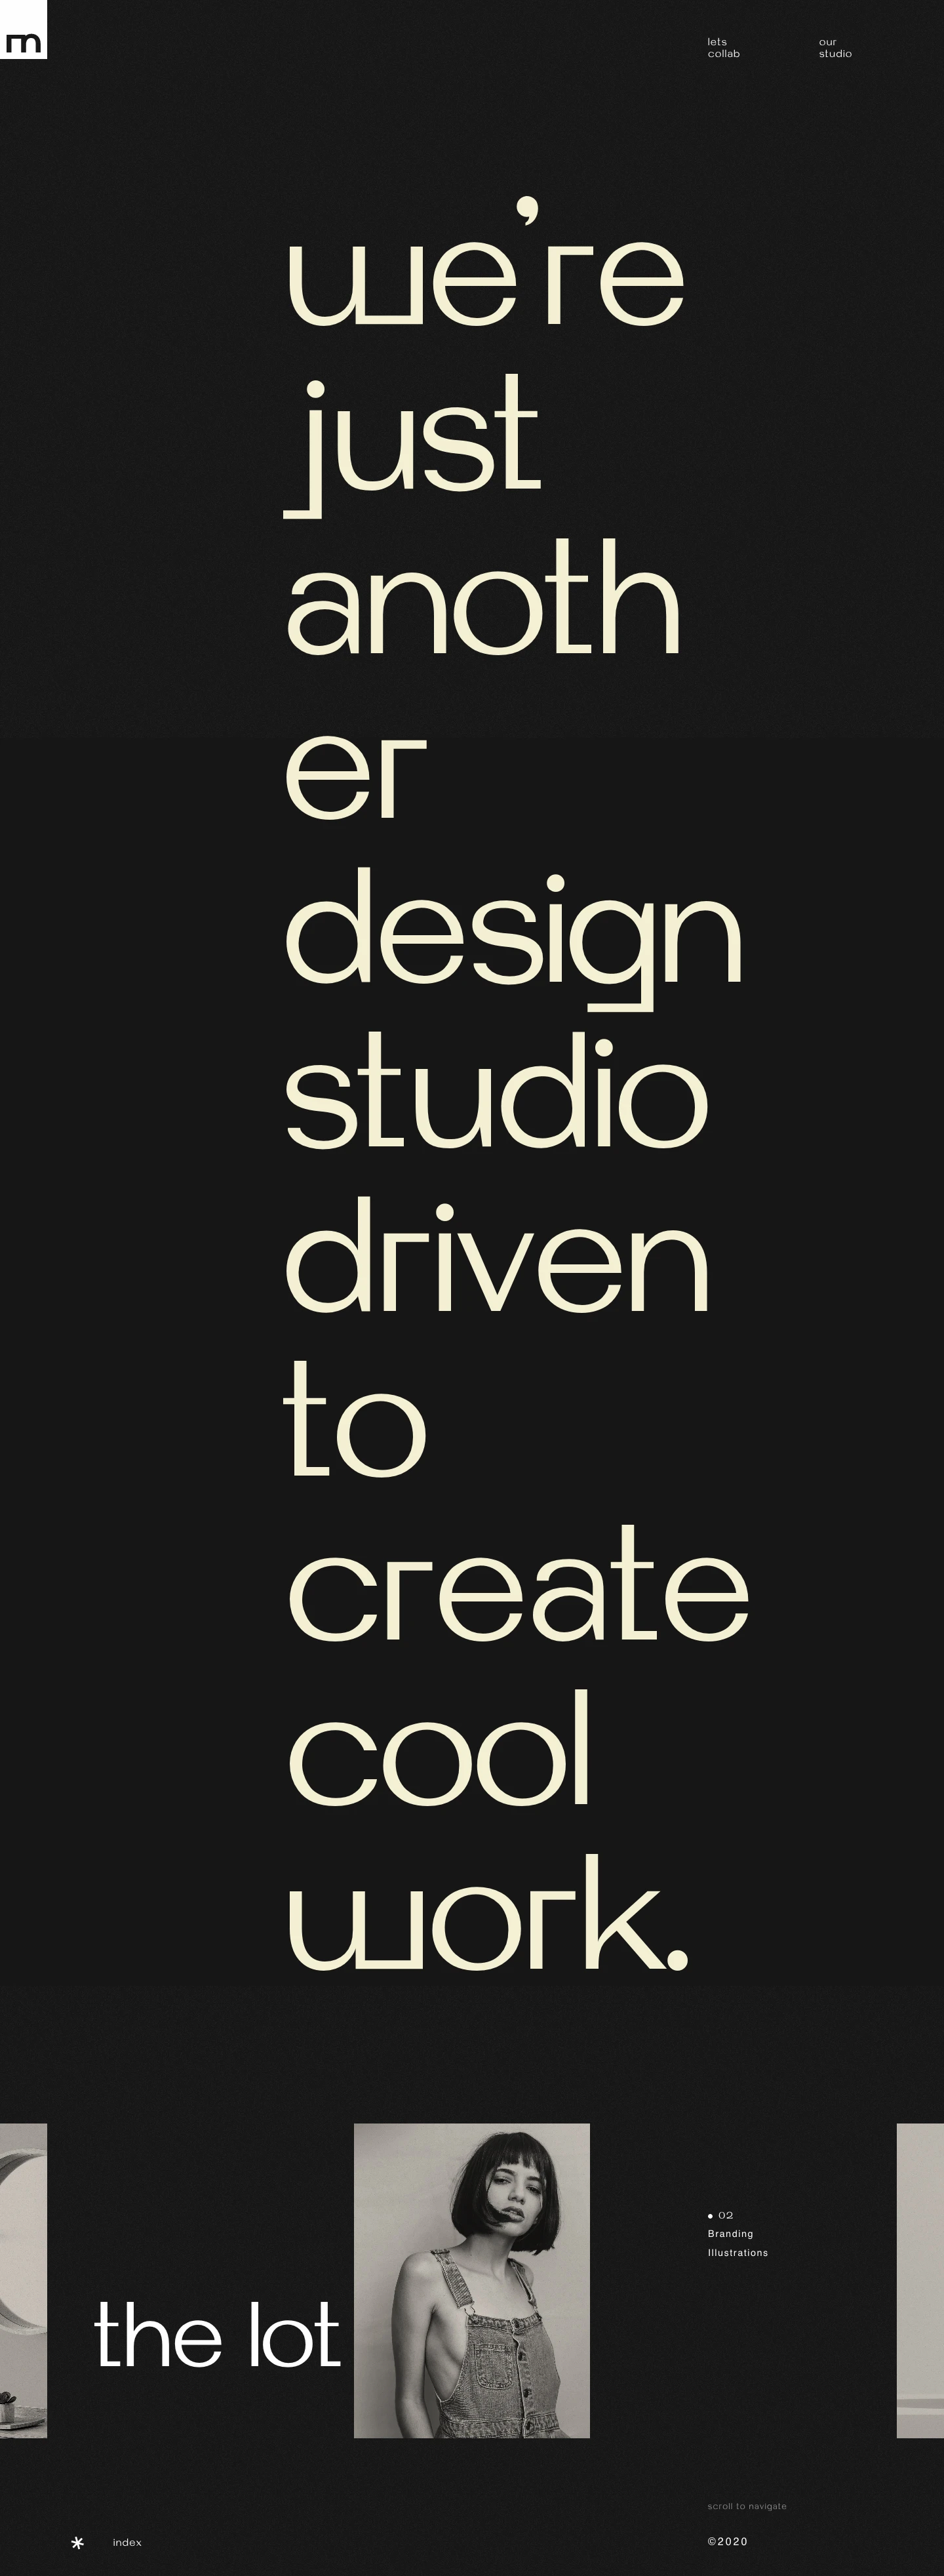 Studio Malvah Landing Page Example: Just another design studio driven to create cool shit.